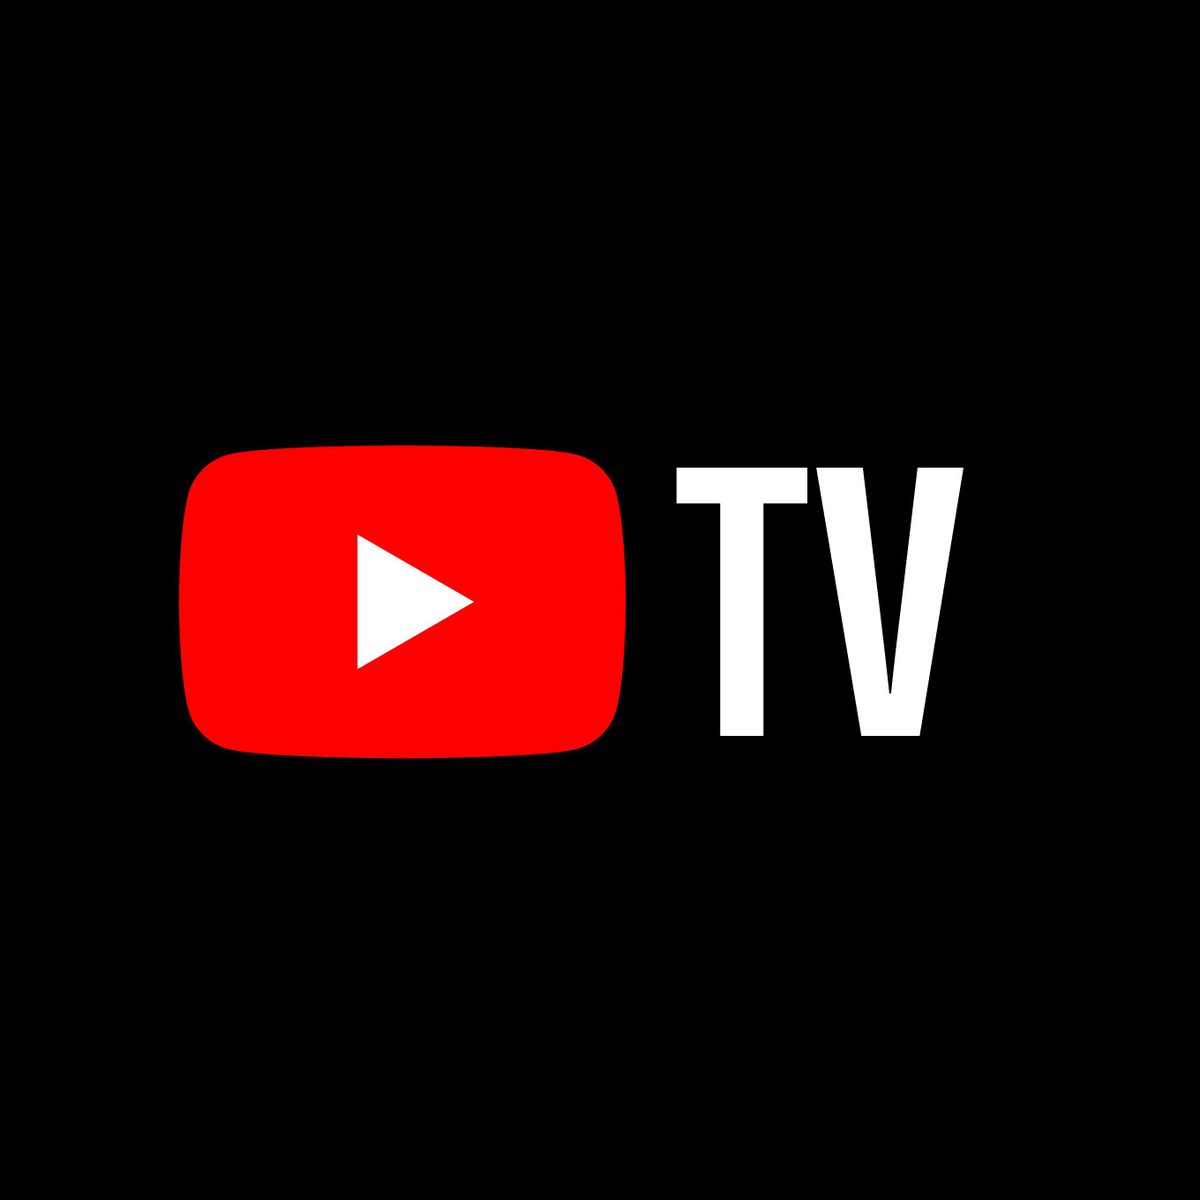 An image showing the YouTube TV logo on a black background.